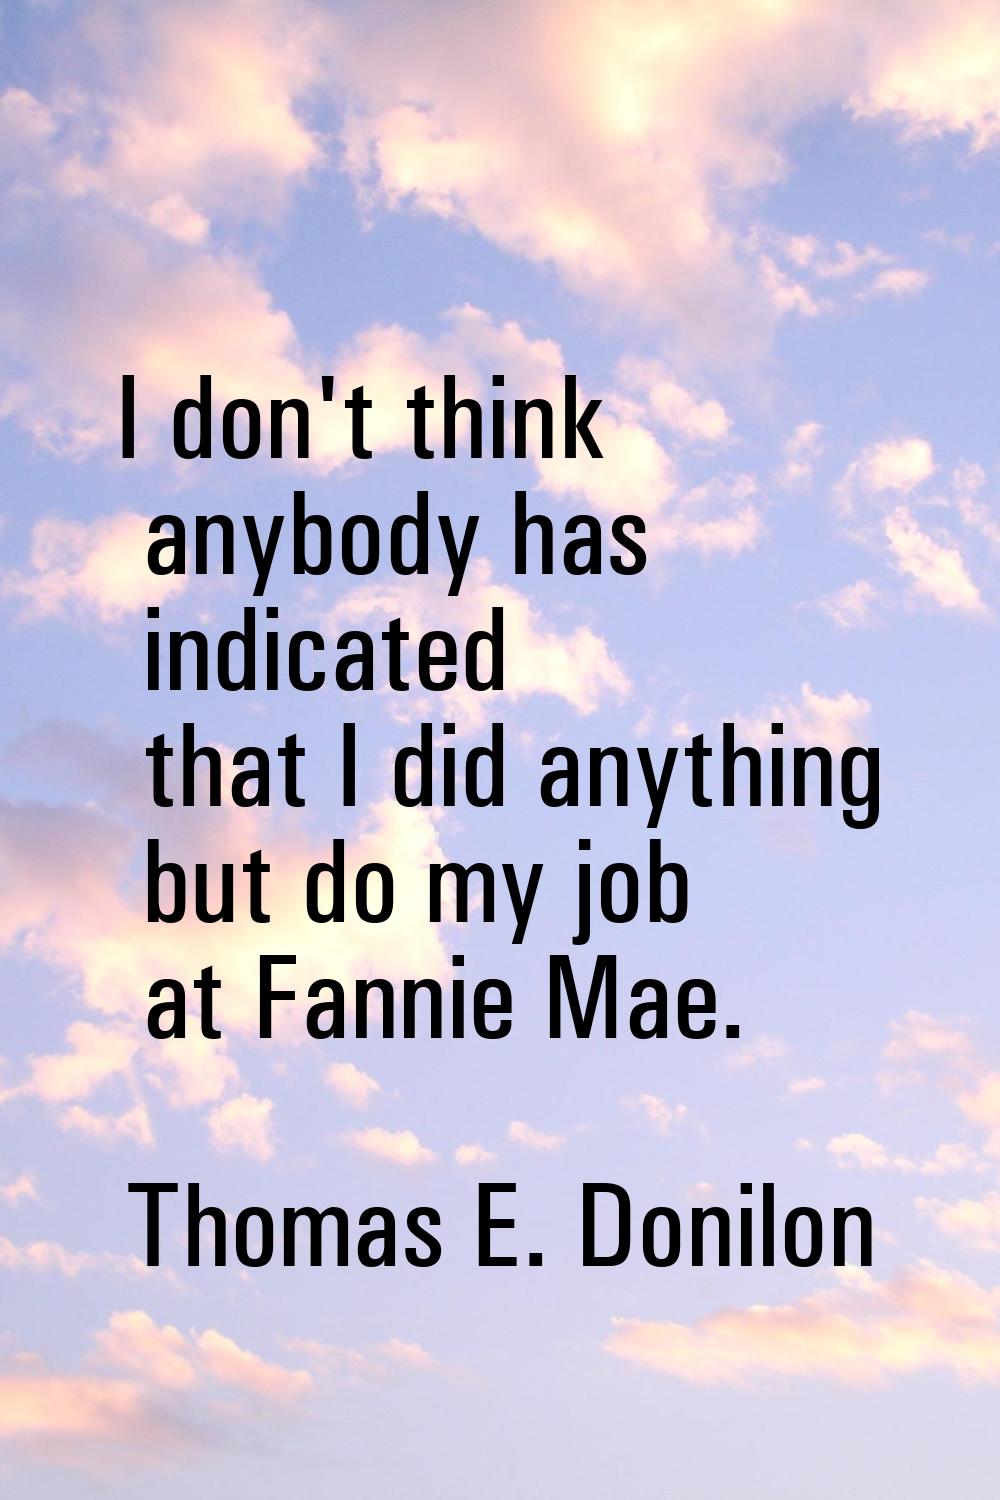 I don't think anybody has indicated that I did anything but do my job at Fannie Mae.